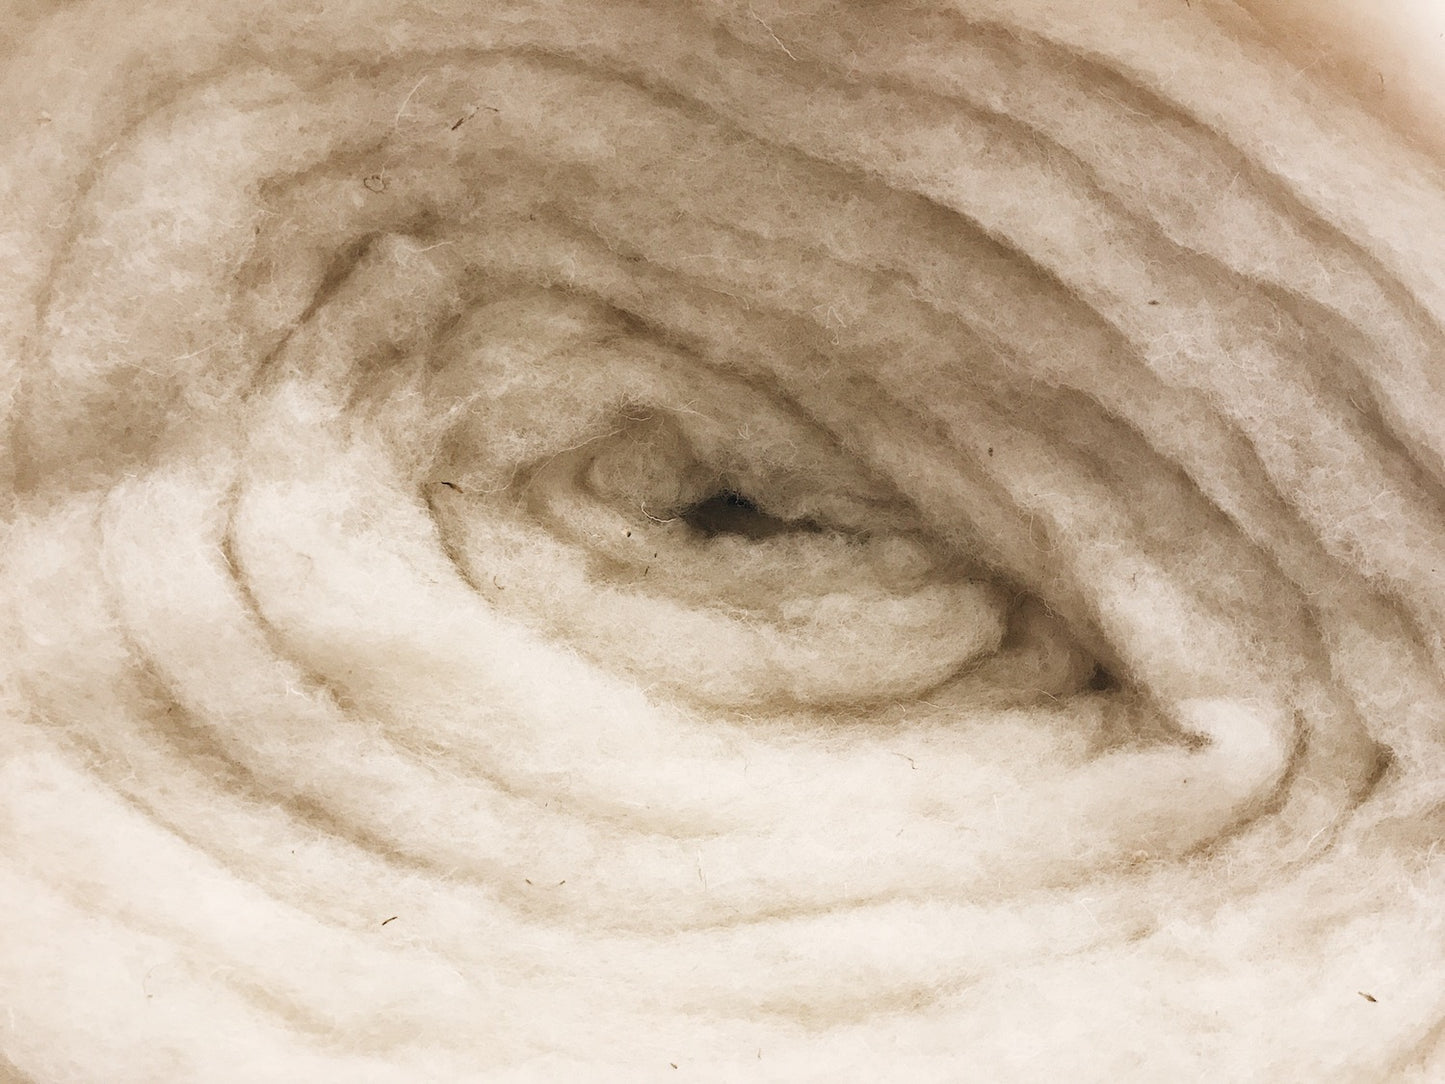 Carded wool for felting or batting - Natural White